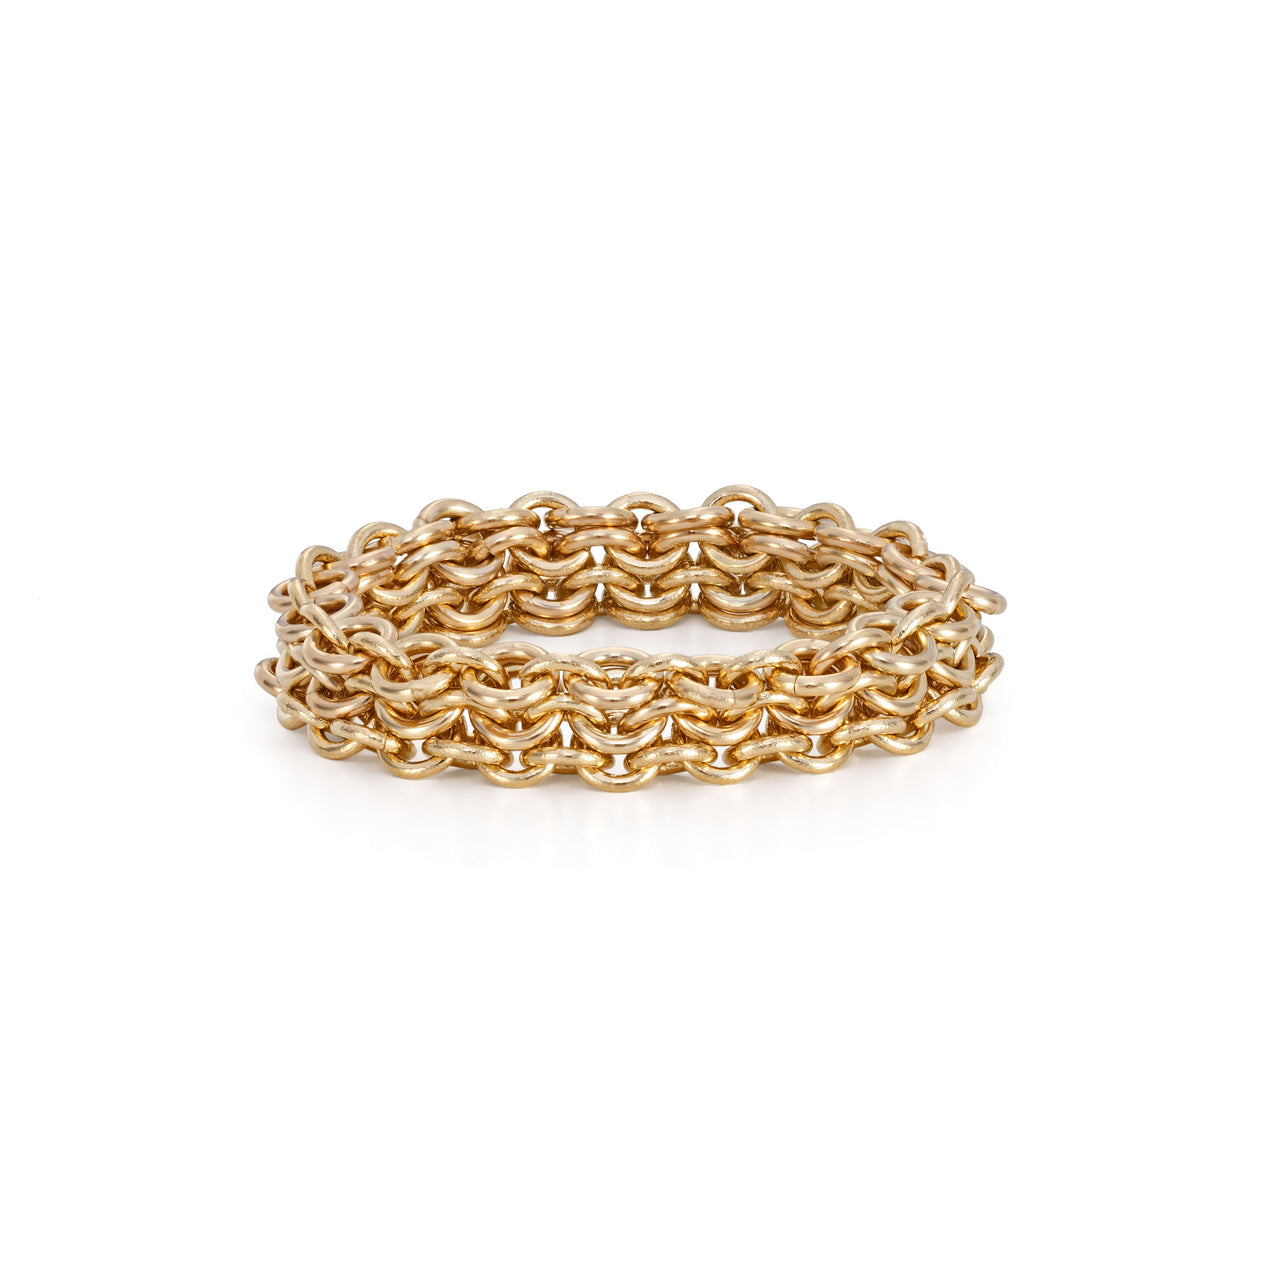 Sun Light Chain Ring handcrafted in 18ct recycled yellow gold contemporary chainmail rings by Corrinne Eira Evans